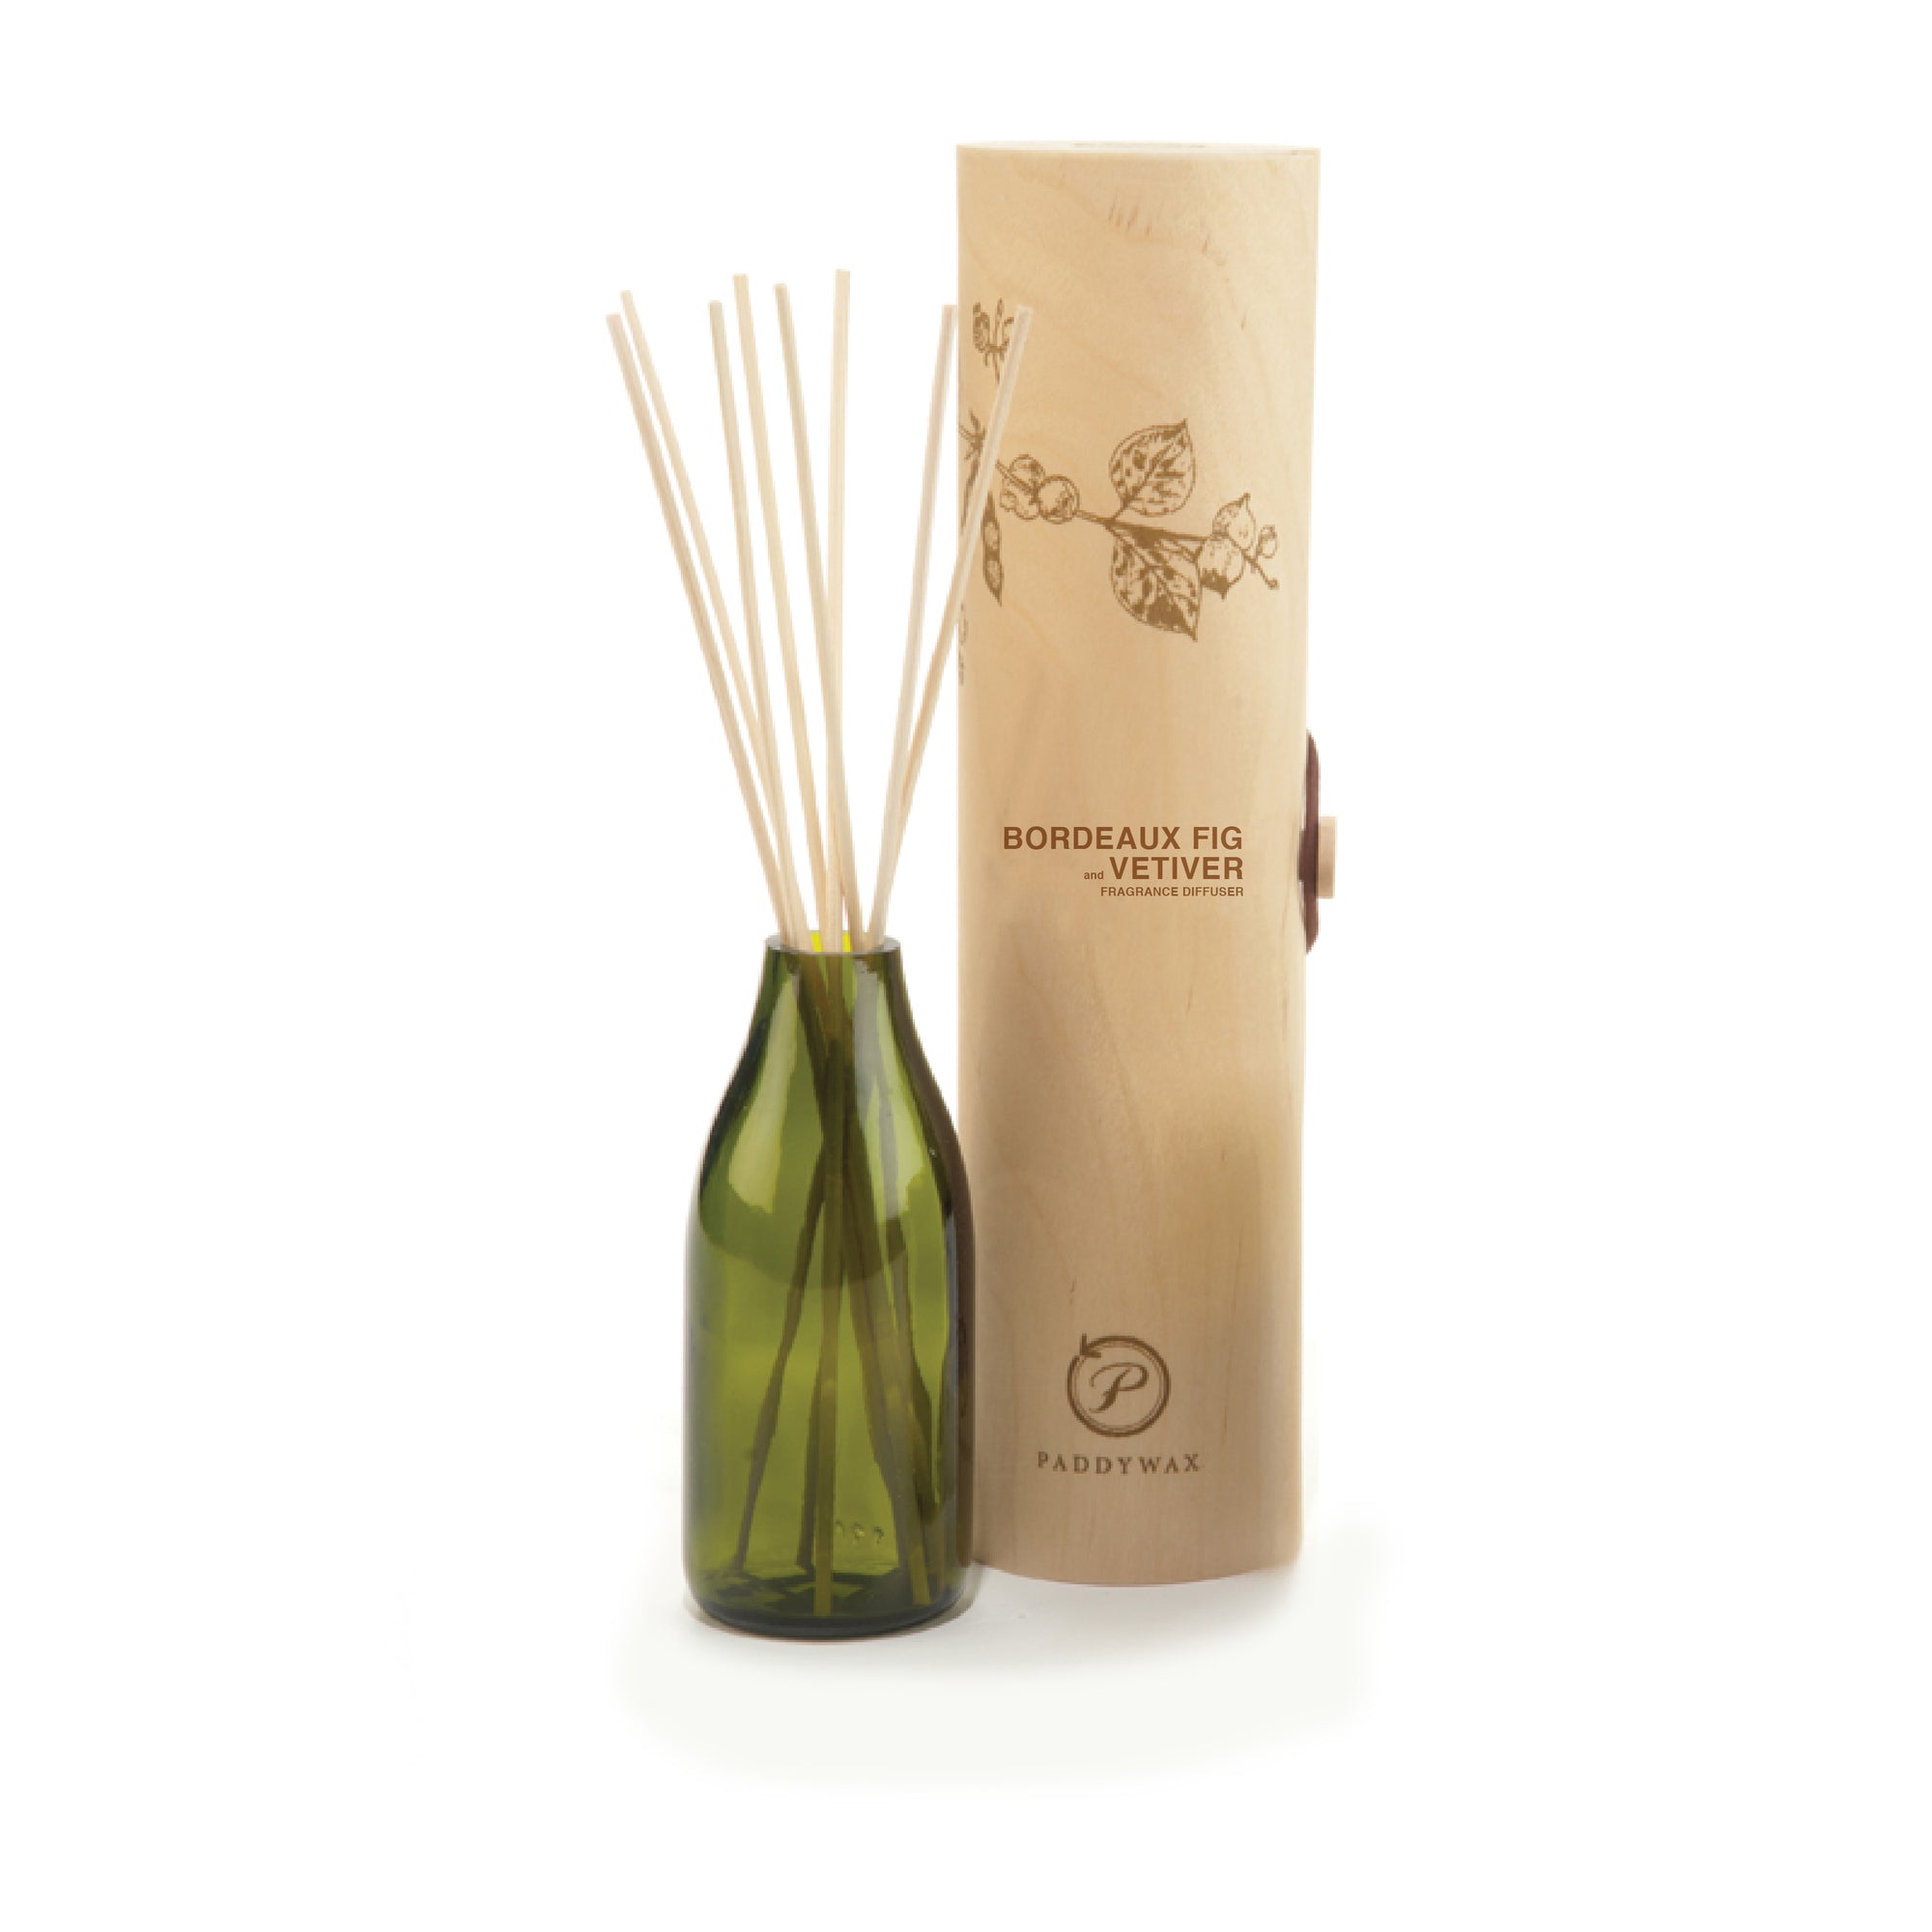 Paddy Wax Eco Green Recycled Glass Diffuser (118ml) - Bordeaux Fig & Vetiver